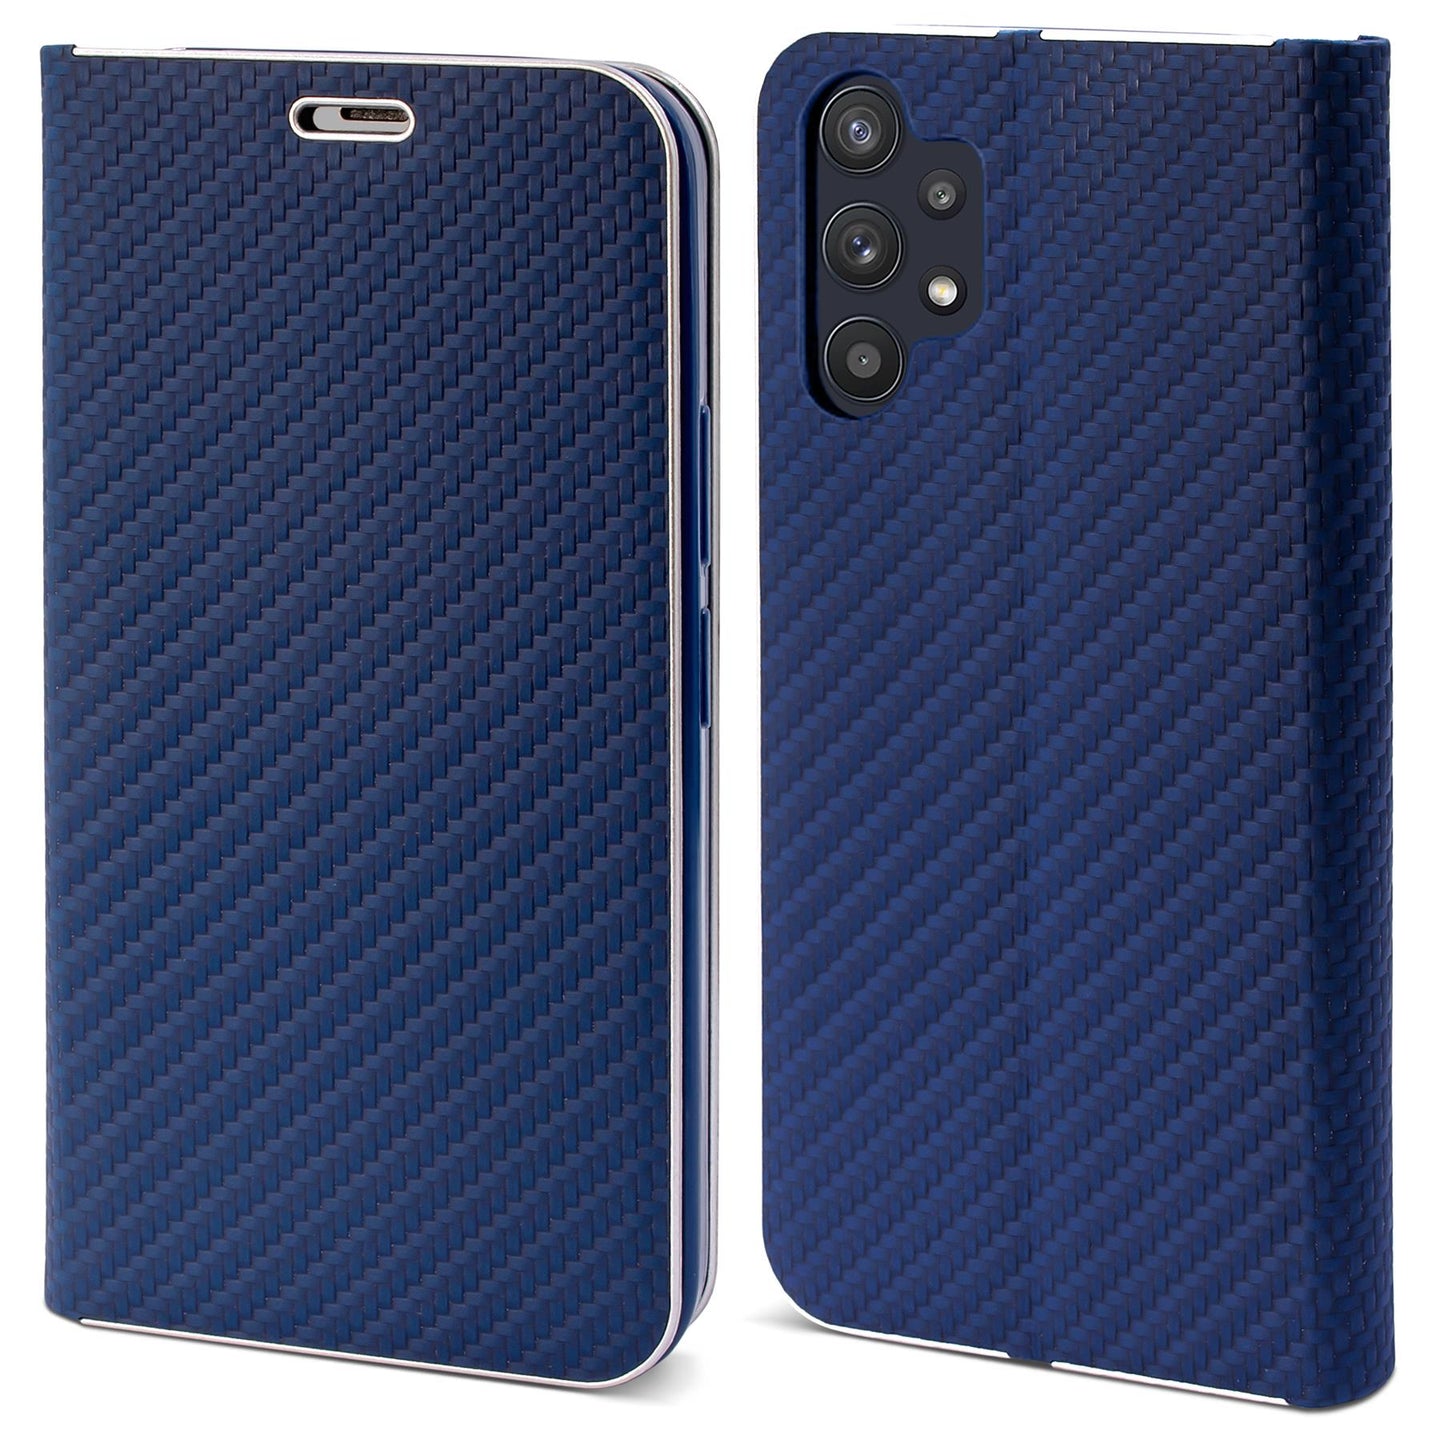 Moozy Wallet Phone Case for Samsung a32 5g, Carbon - Flip Case with Metallic Border Design Magnetic Closure Flip Cover with Card Holder and Kickstand Function, Dark blue